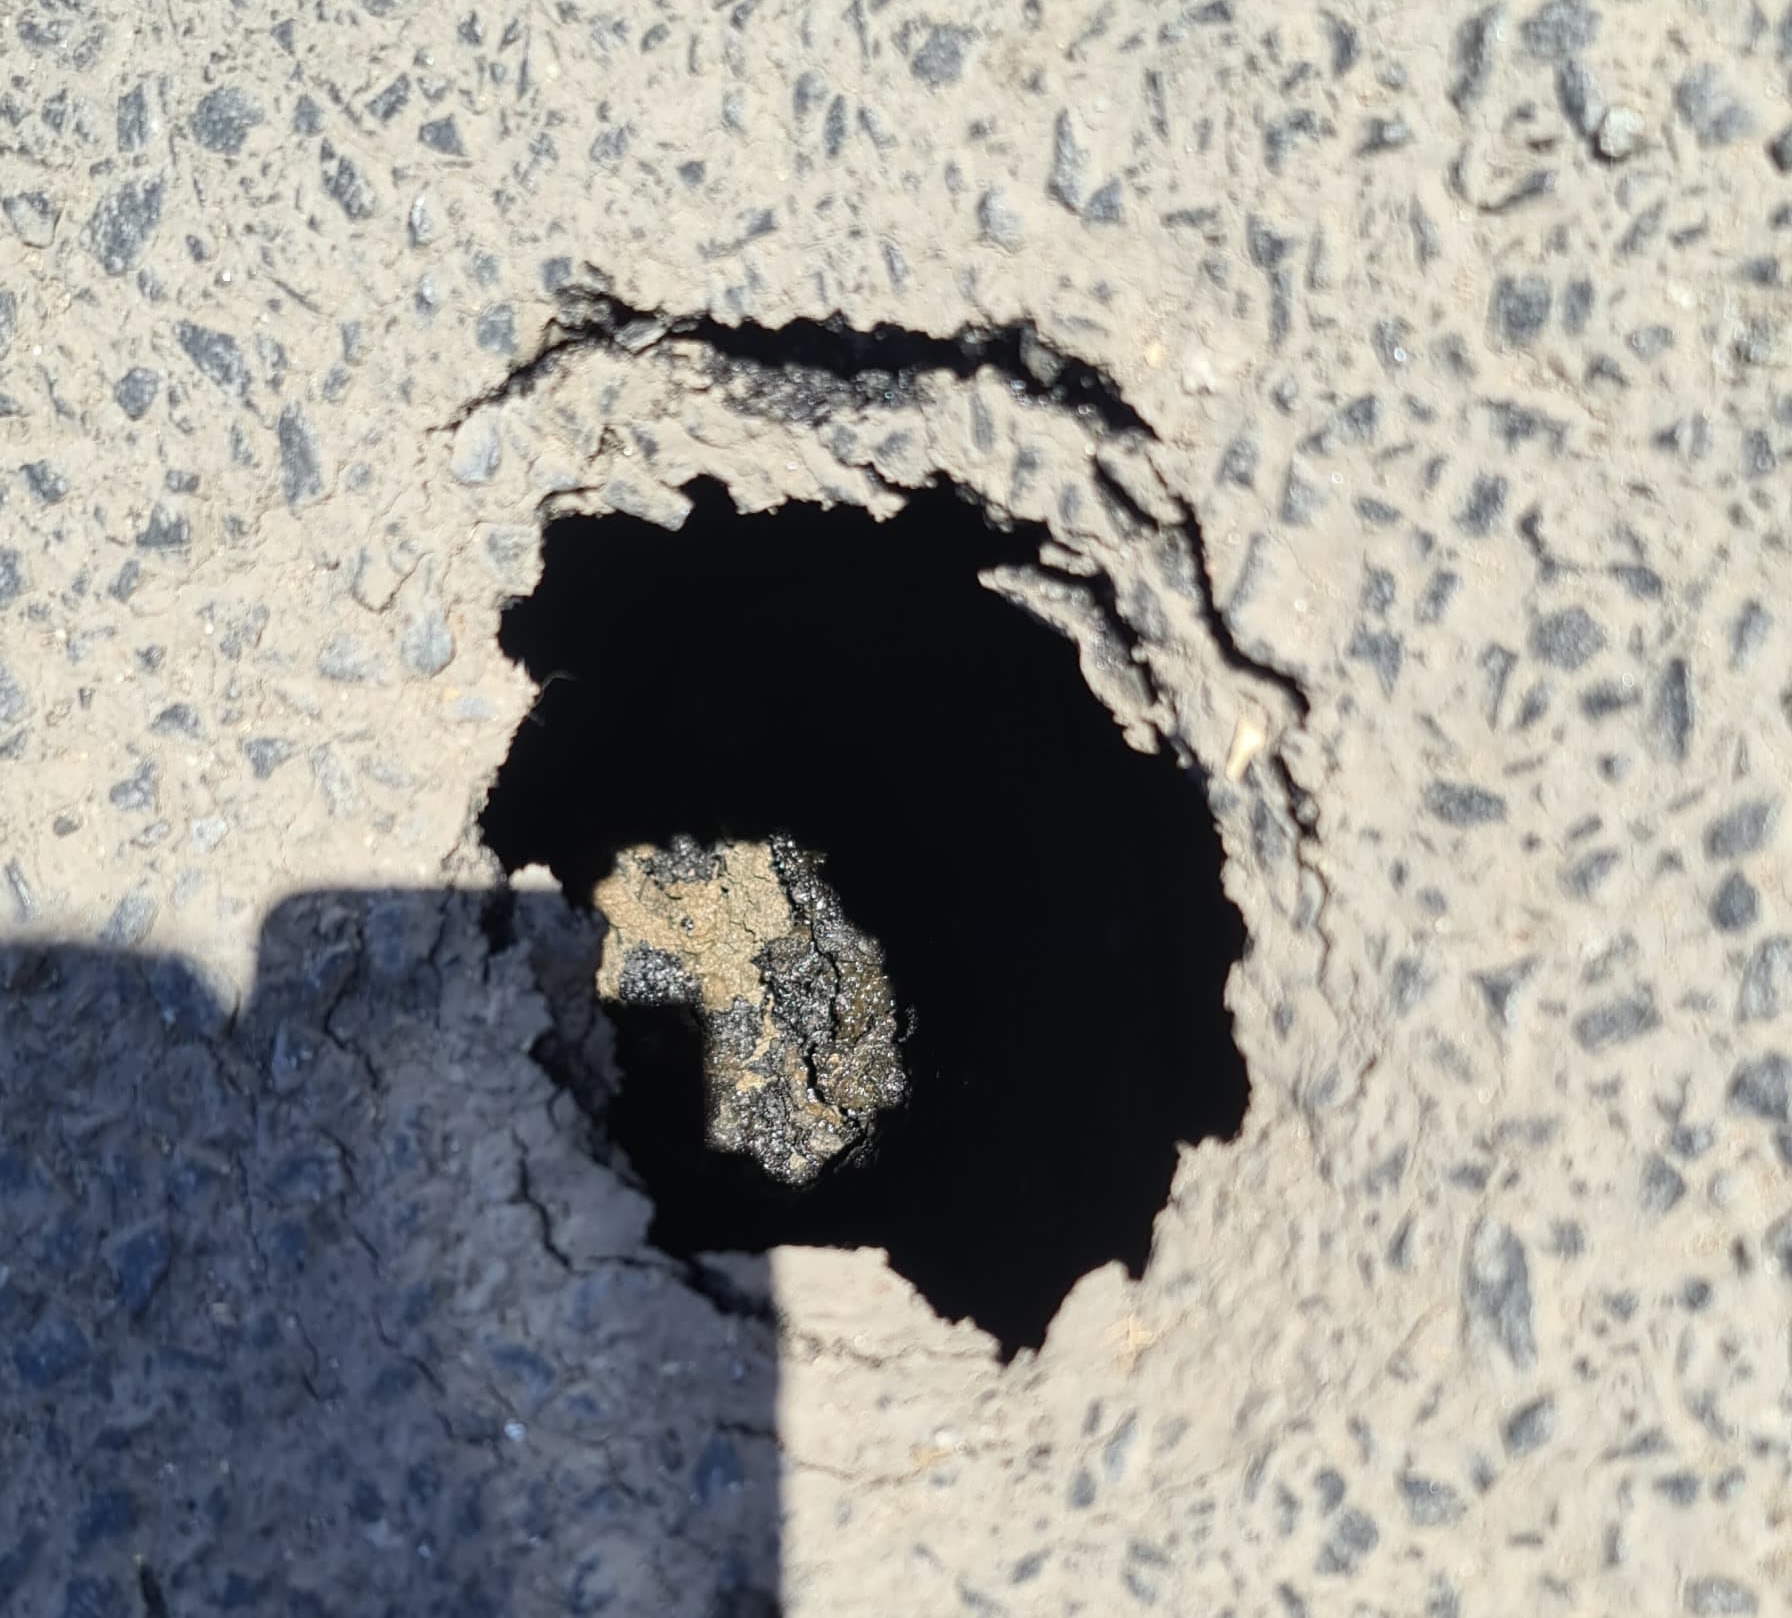 NEWS | Reports of a sinkhole on a busy residential street in Hereford